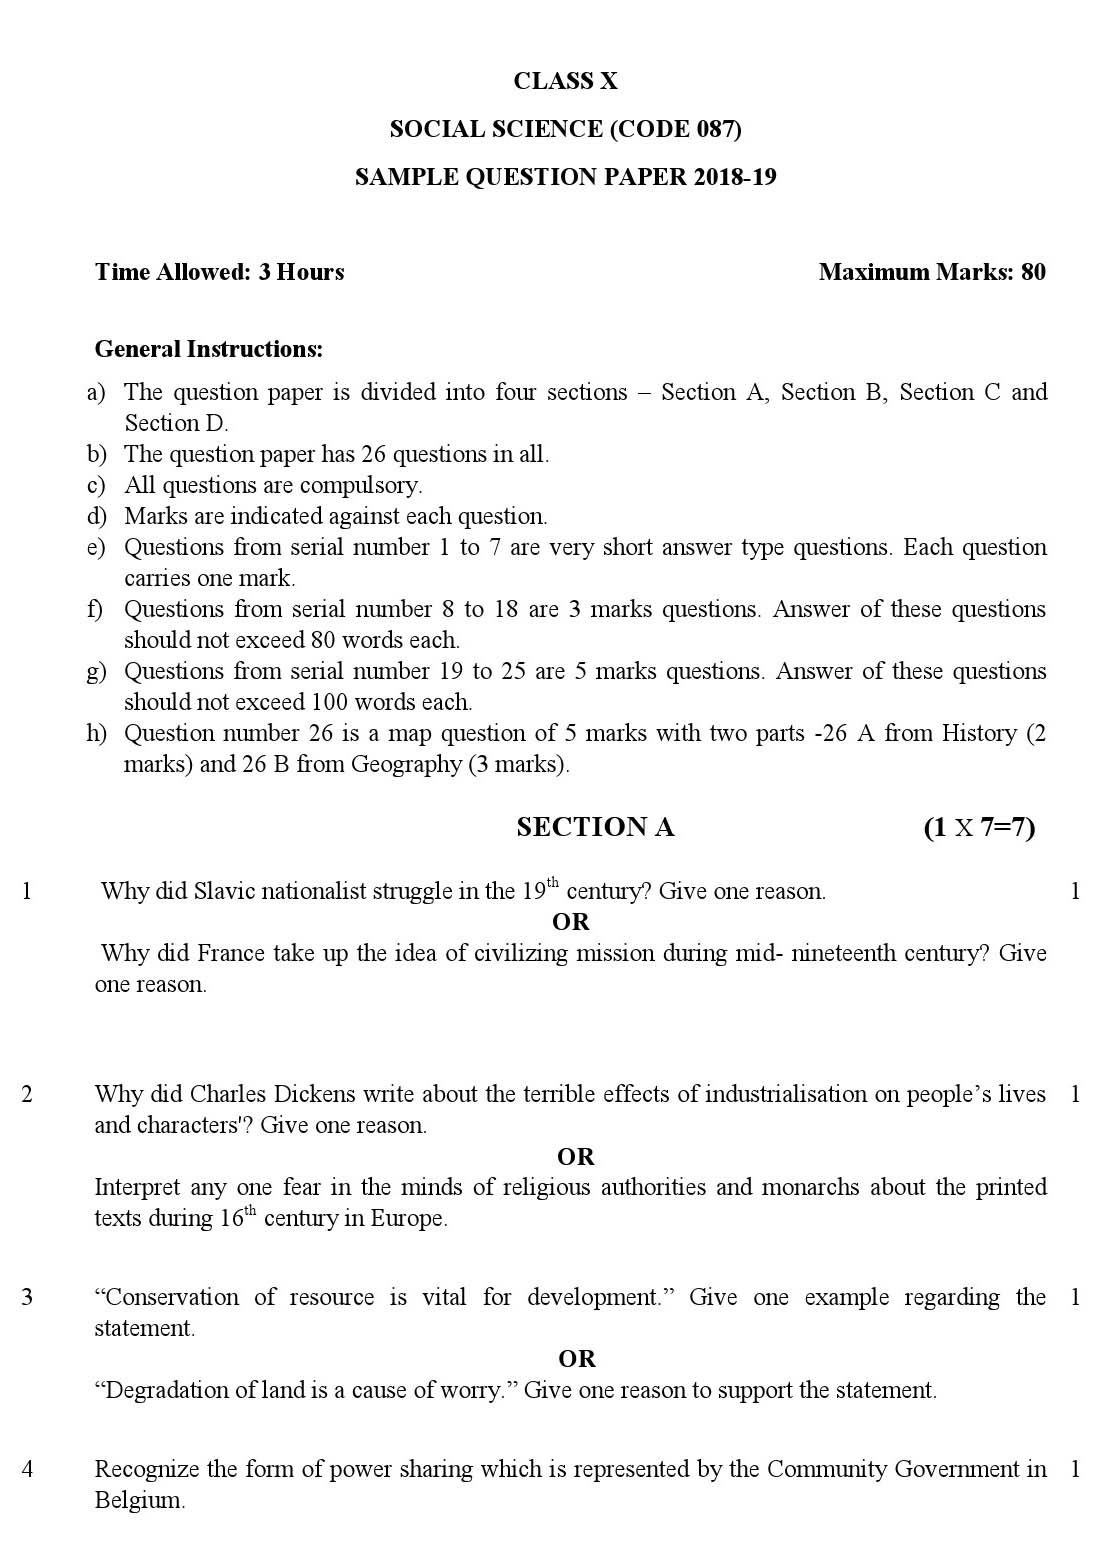 Social Science CBSE Class X Sample Question Paper 2018-19 - Image 1